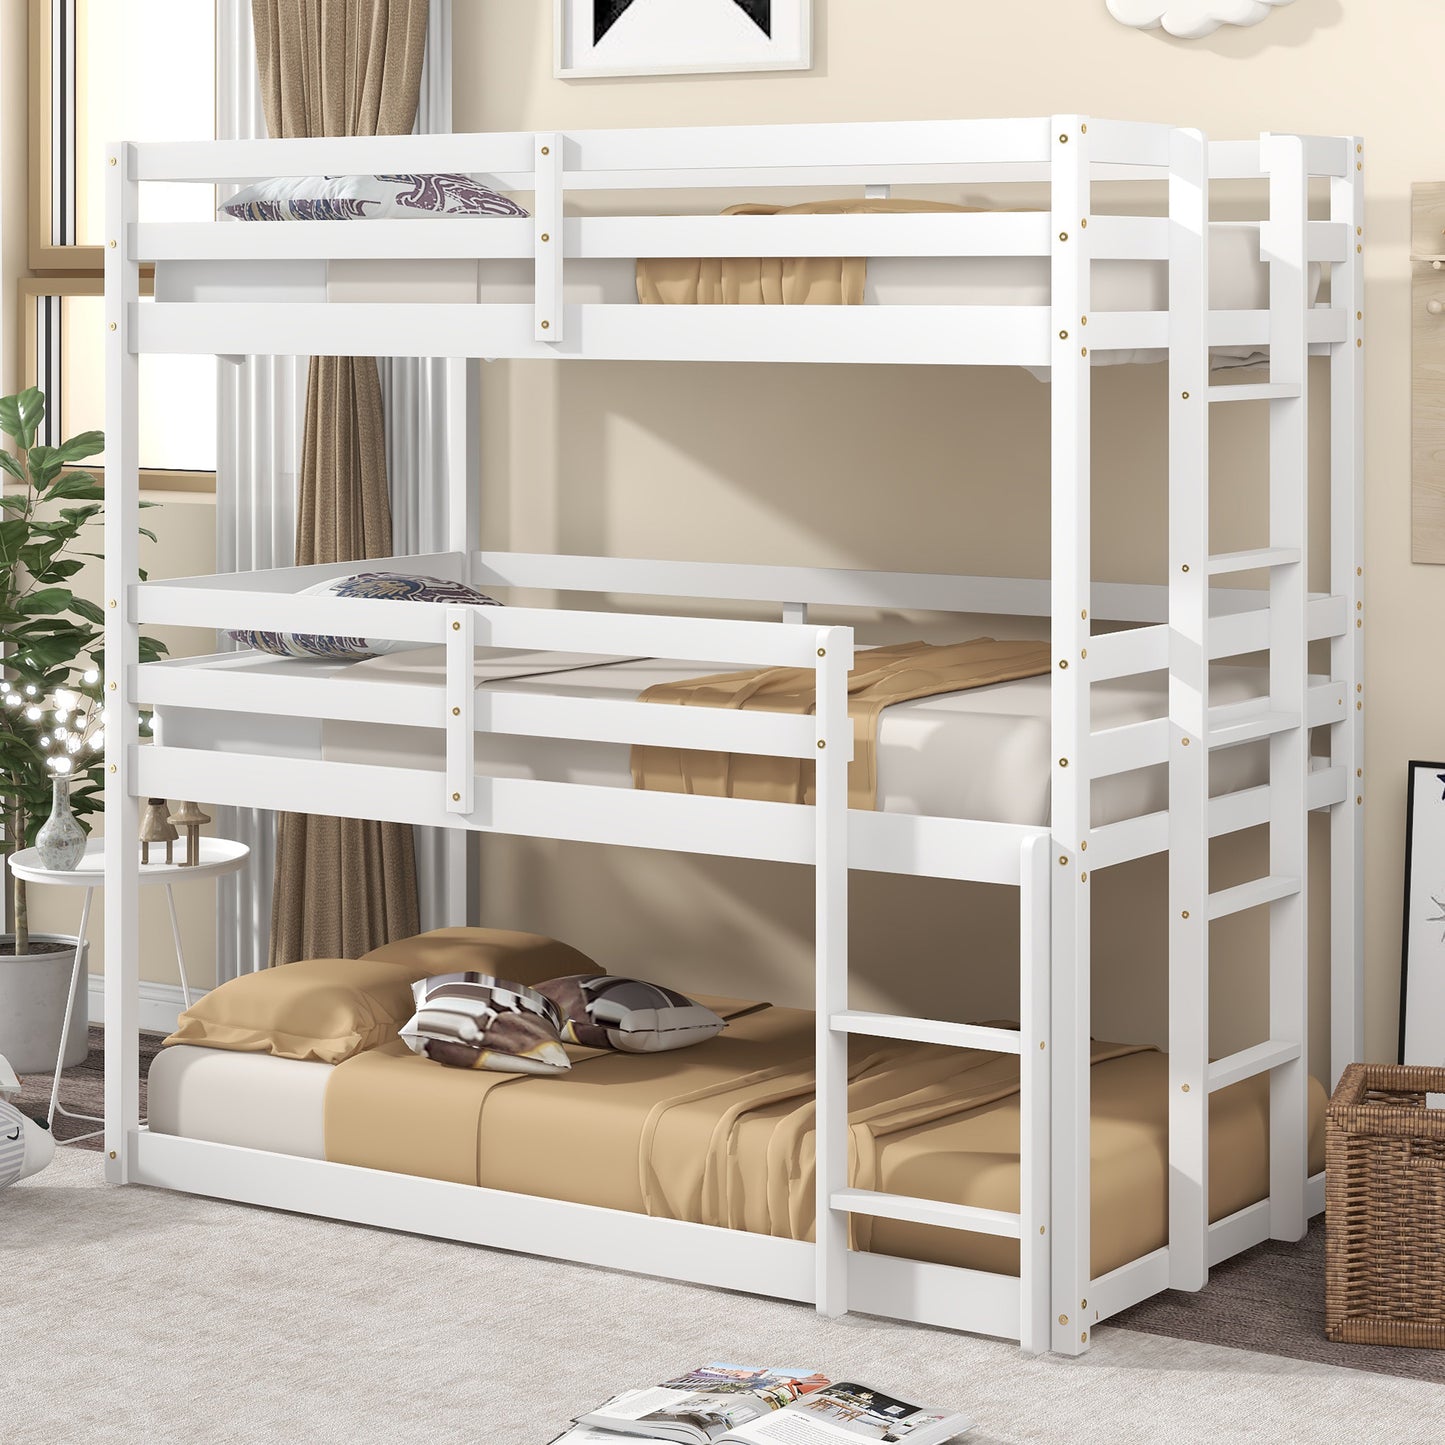 SYNGAR White Wood Triple Bunk Bed Frame for Kids, 3 Twin Bed Triple Floor Bunk Bed with Ladders, Adjustable Detachable Design 3 Bed Frame, No Box Spring Needed, Twin Over Twin Over Twin